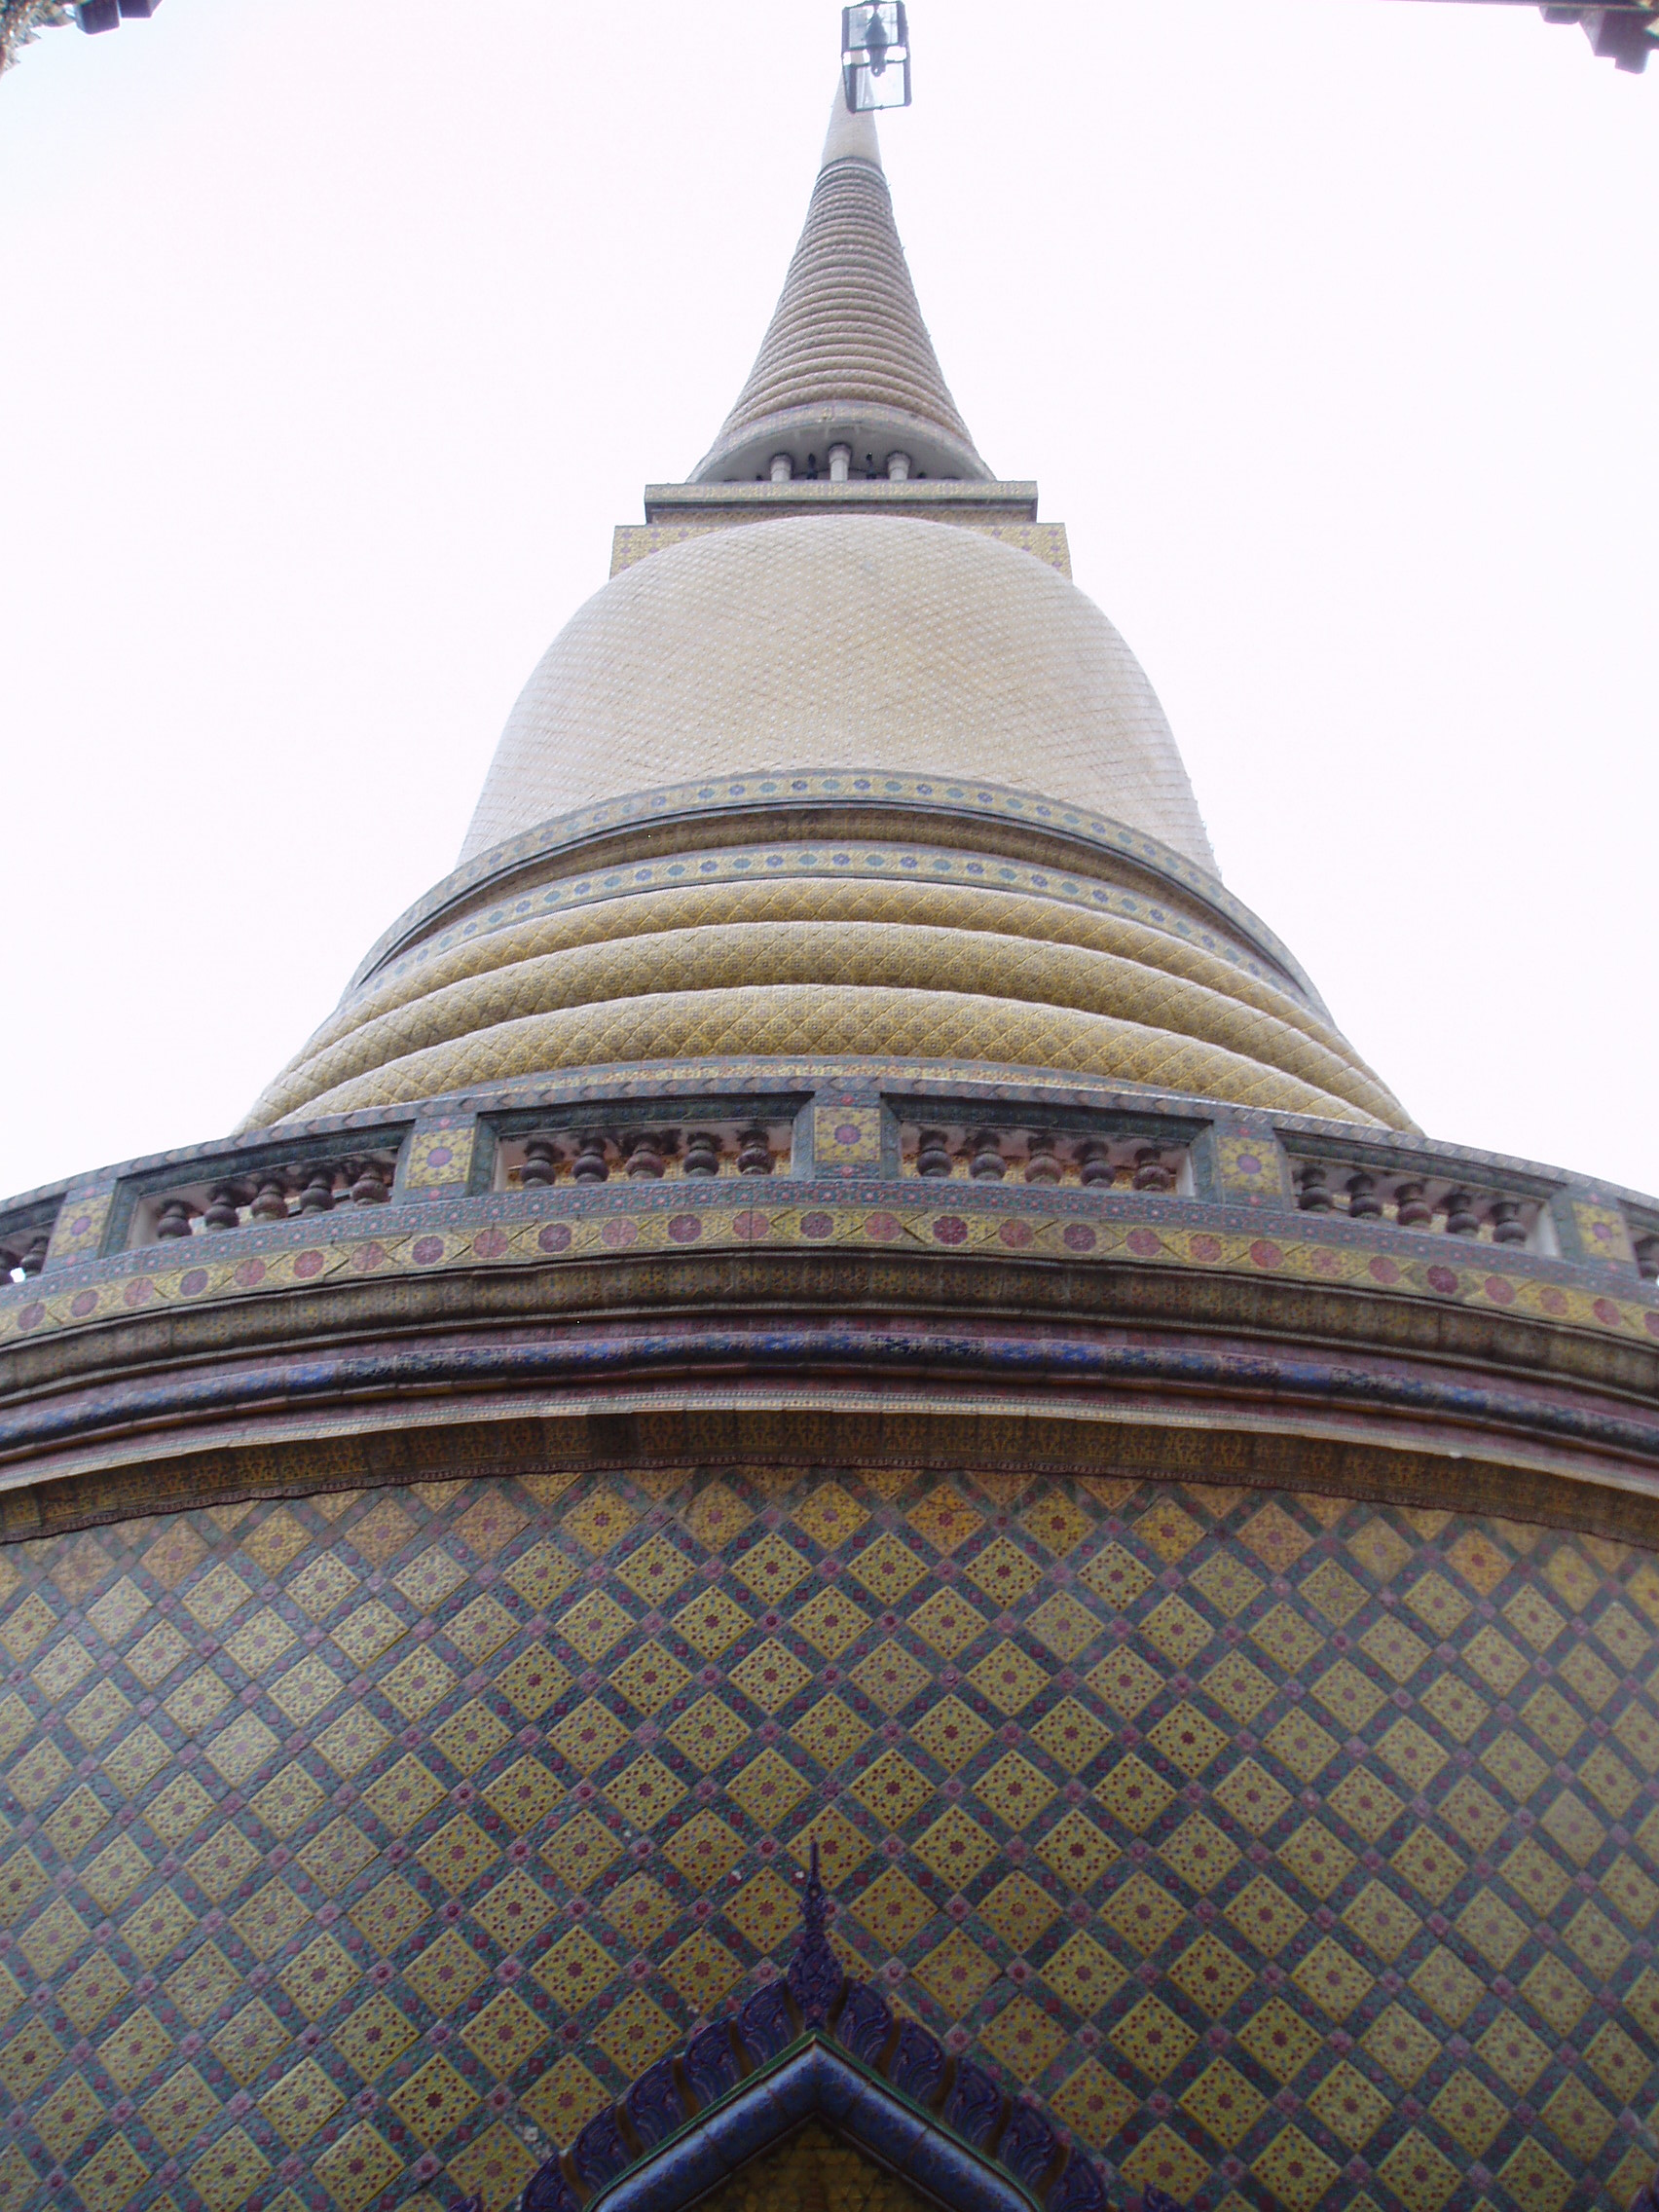 Main Stupa, Wat Ratchabophit, Bangkok Wat Ratchabophit is one of the most unusual temples in Bangkok; built in the latter half of the 19th century it shows marked European influence in certain areas, such as the neo-gothic interior of the main bot (prayer hall) and many of the monuments in the adjoining Royal Cemetery, that includes a domed classical style tower and pinnacled gothic steeples amongst more traditional Thai and Khmer style structures. The centrepiece of the Temple is the huge tile-covered stupa that grows from the heart of the complex and is surrounded by a tight circular courtyard. The surrounding structures are richly decorated and gilded with typical Thai richness. The entrance gates to the temple compound have carved and painted door panels with bizarre figures that appear to be 'farang' (foreign/European) guards holding rifles! en.wikipedia.org/wiki/Wat_Ratchabophit